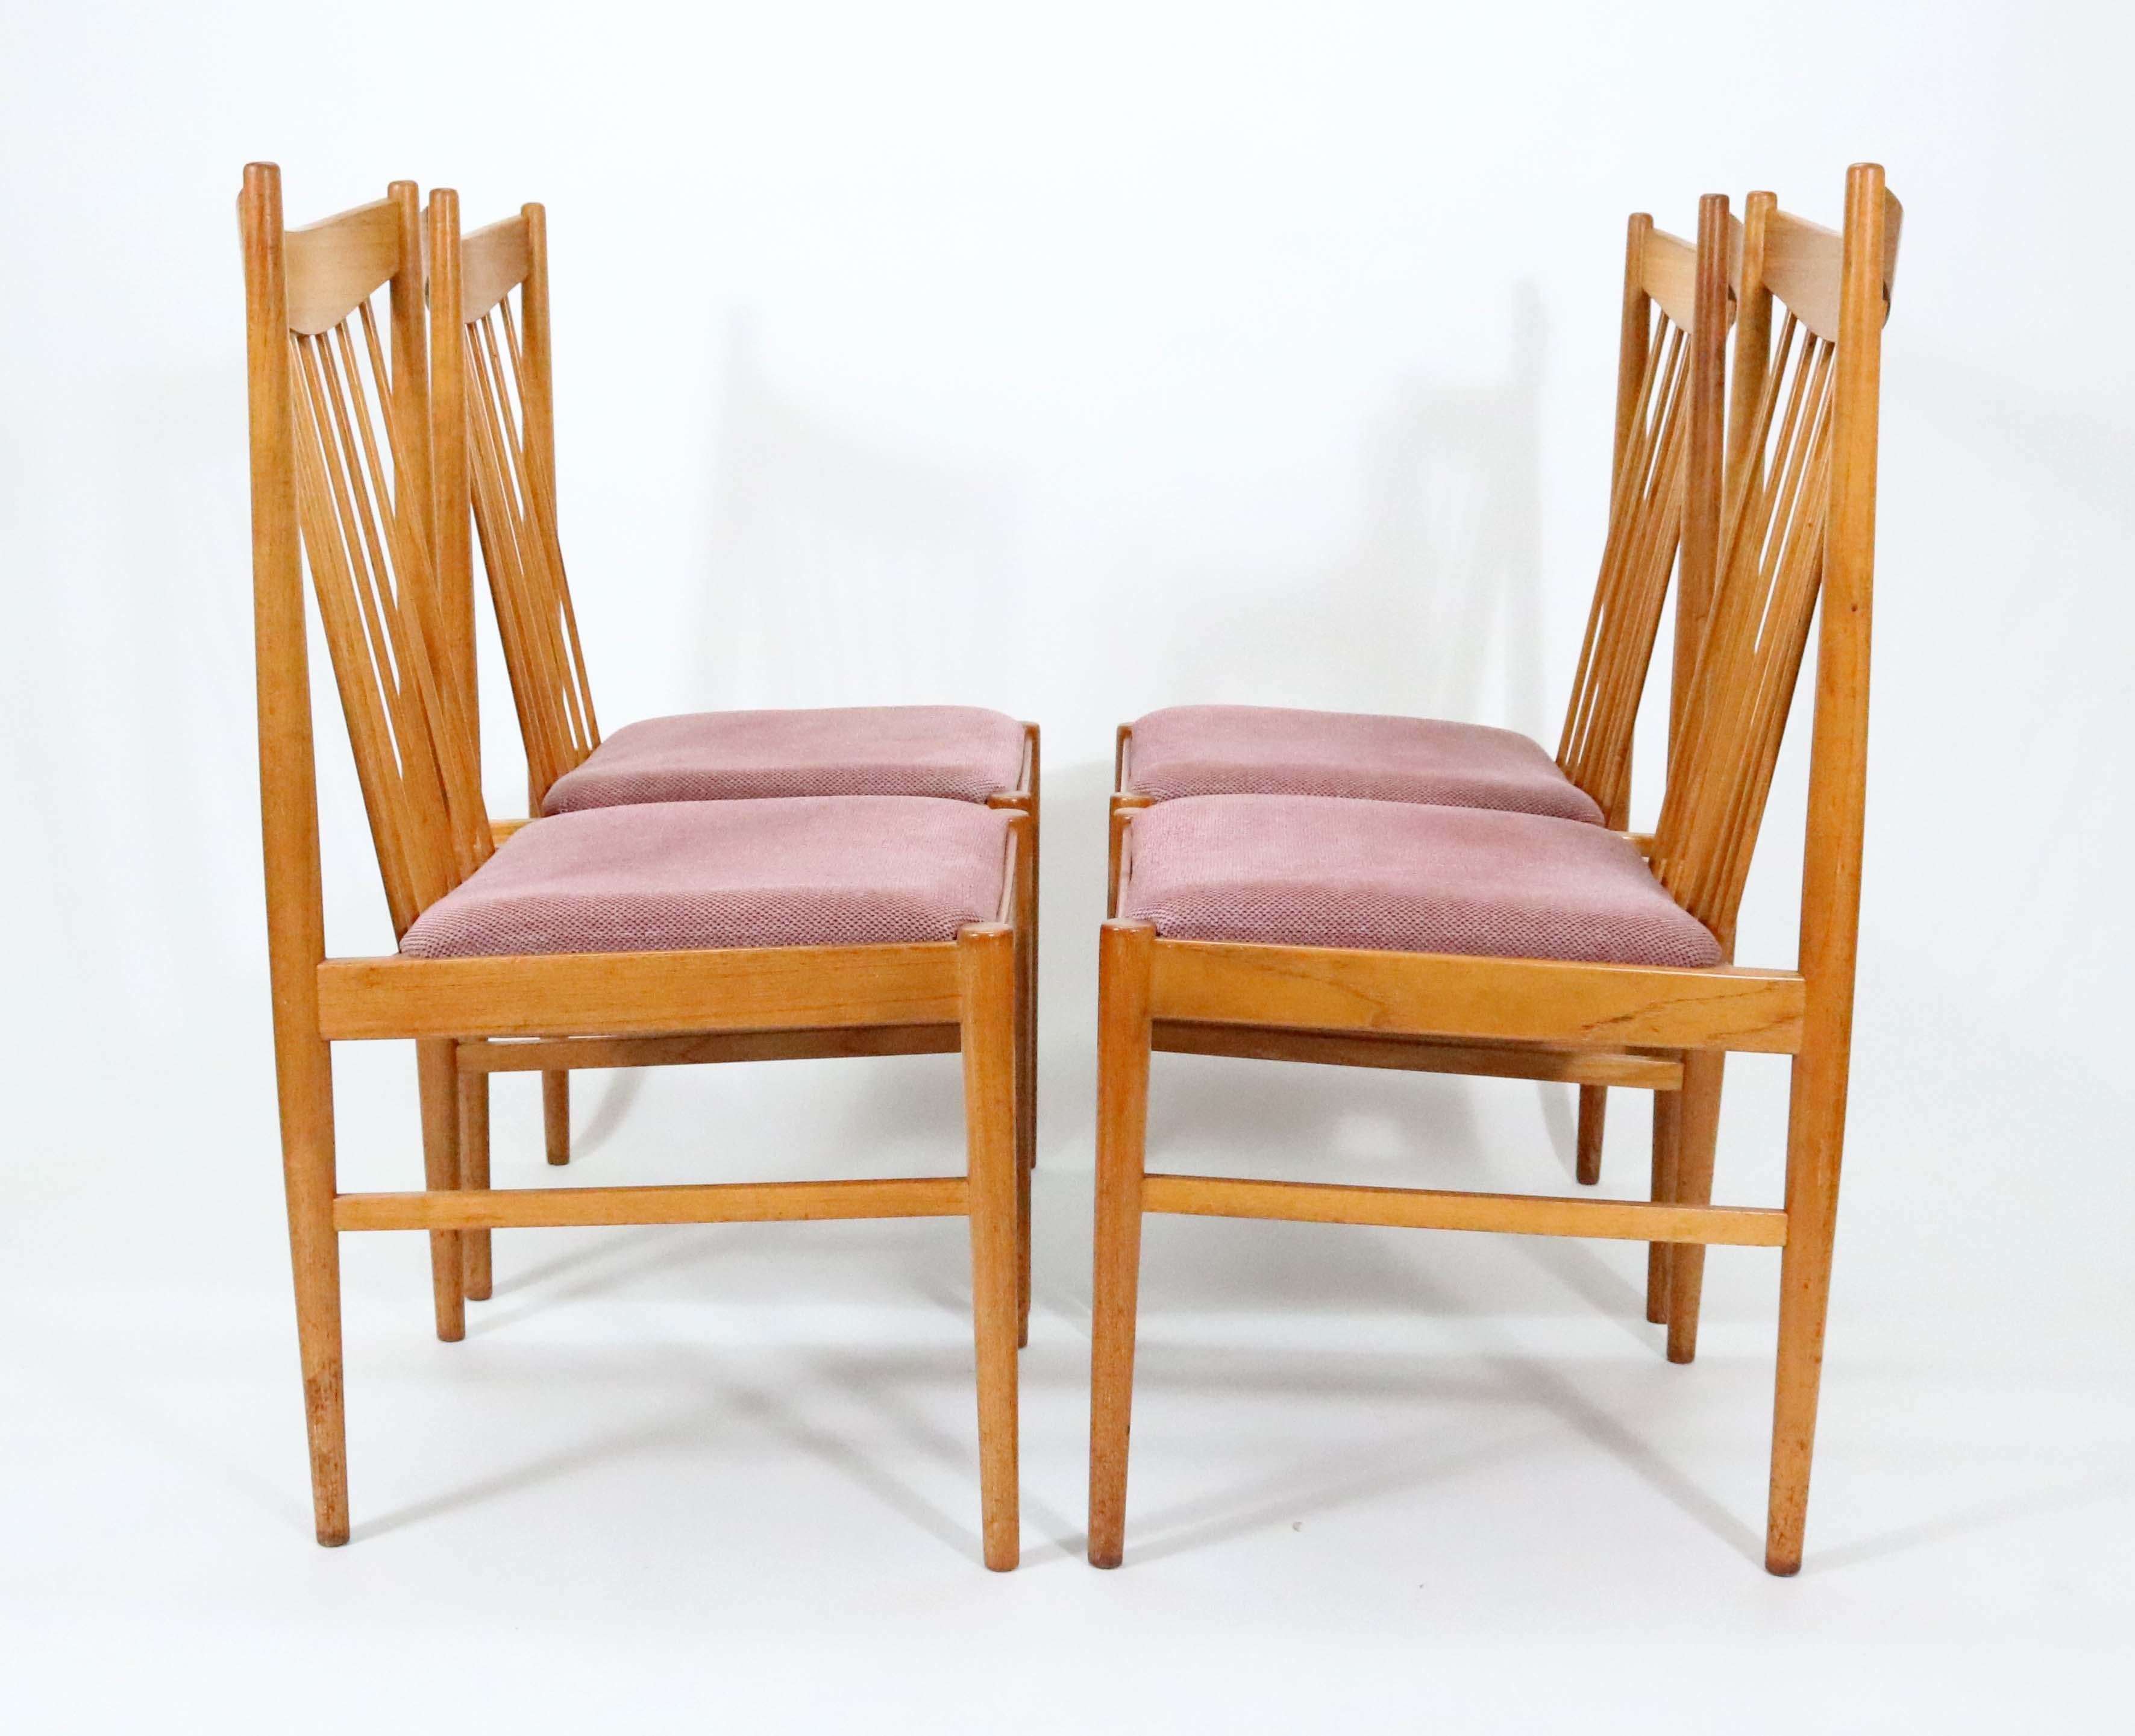 A set of four Model 422 teak dining chairs by Arne Vodder for Sibast.

We were surprised by how remarkably comfortable these chairs are.

Seat reupholstering available at pass-through cost.